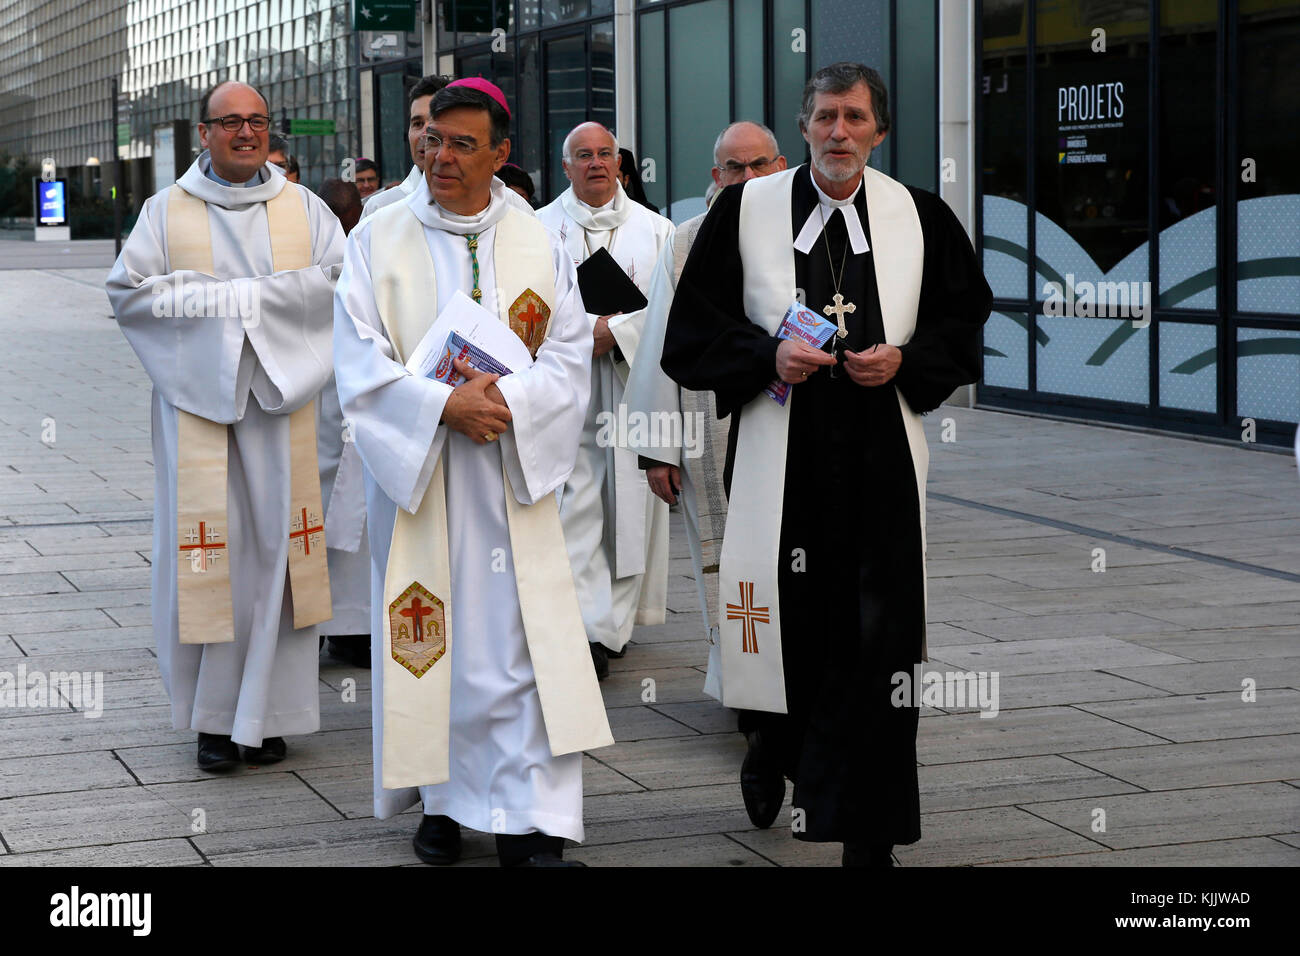 Ecumenical prayer meeting at dawn on Easter sunday in Paris-La Defense, France. Arrival of clergymen. Stock Photo